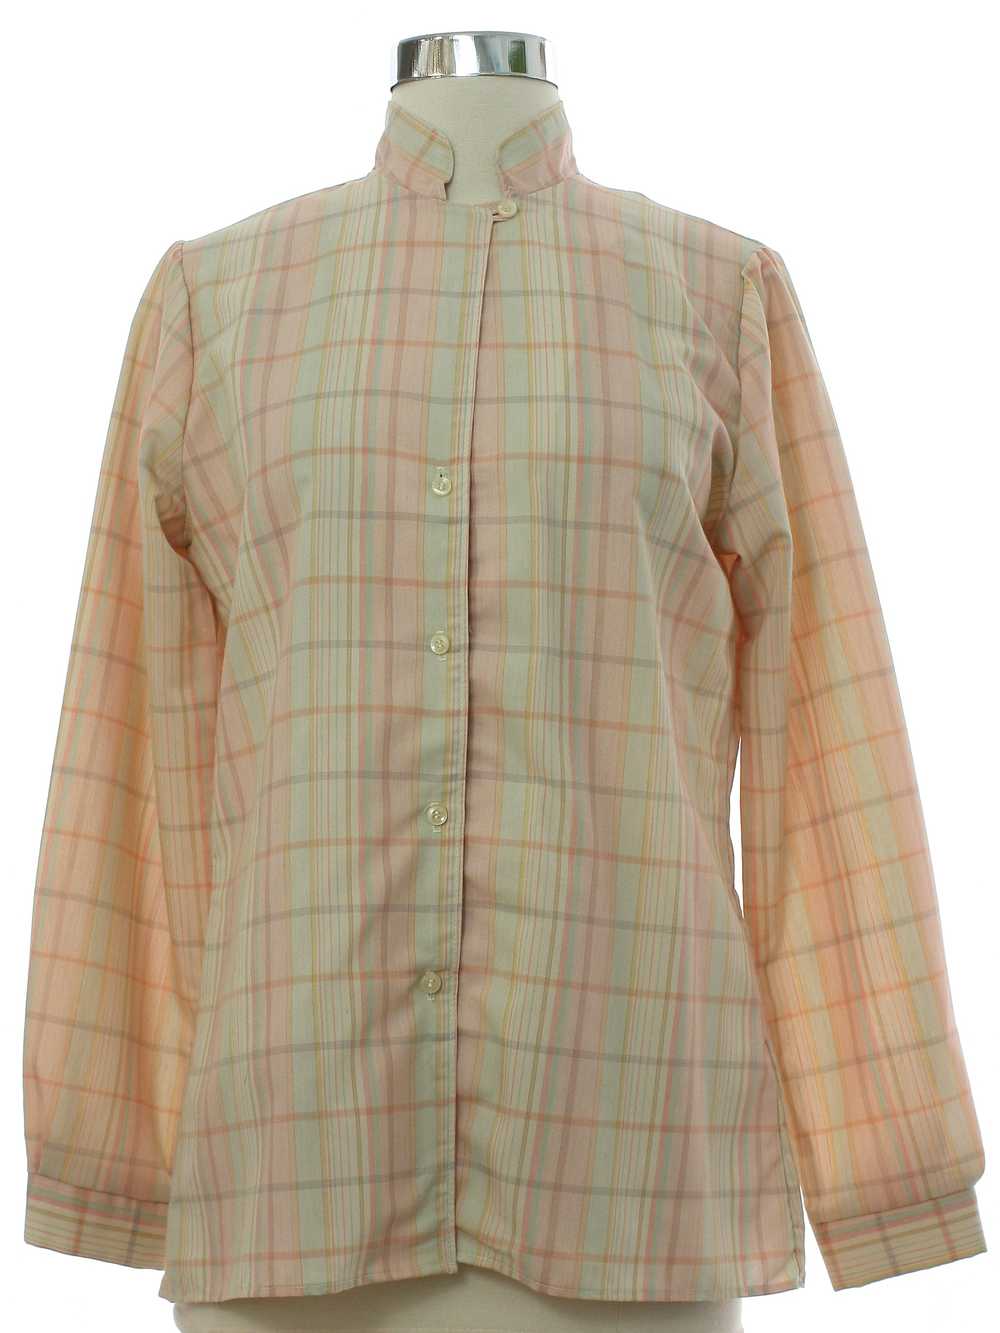 1980's White Stag Womens Mod Shirt - image 1